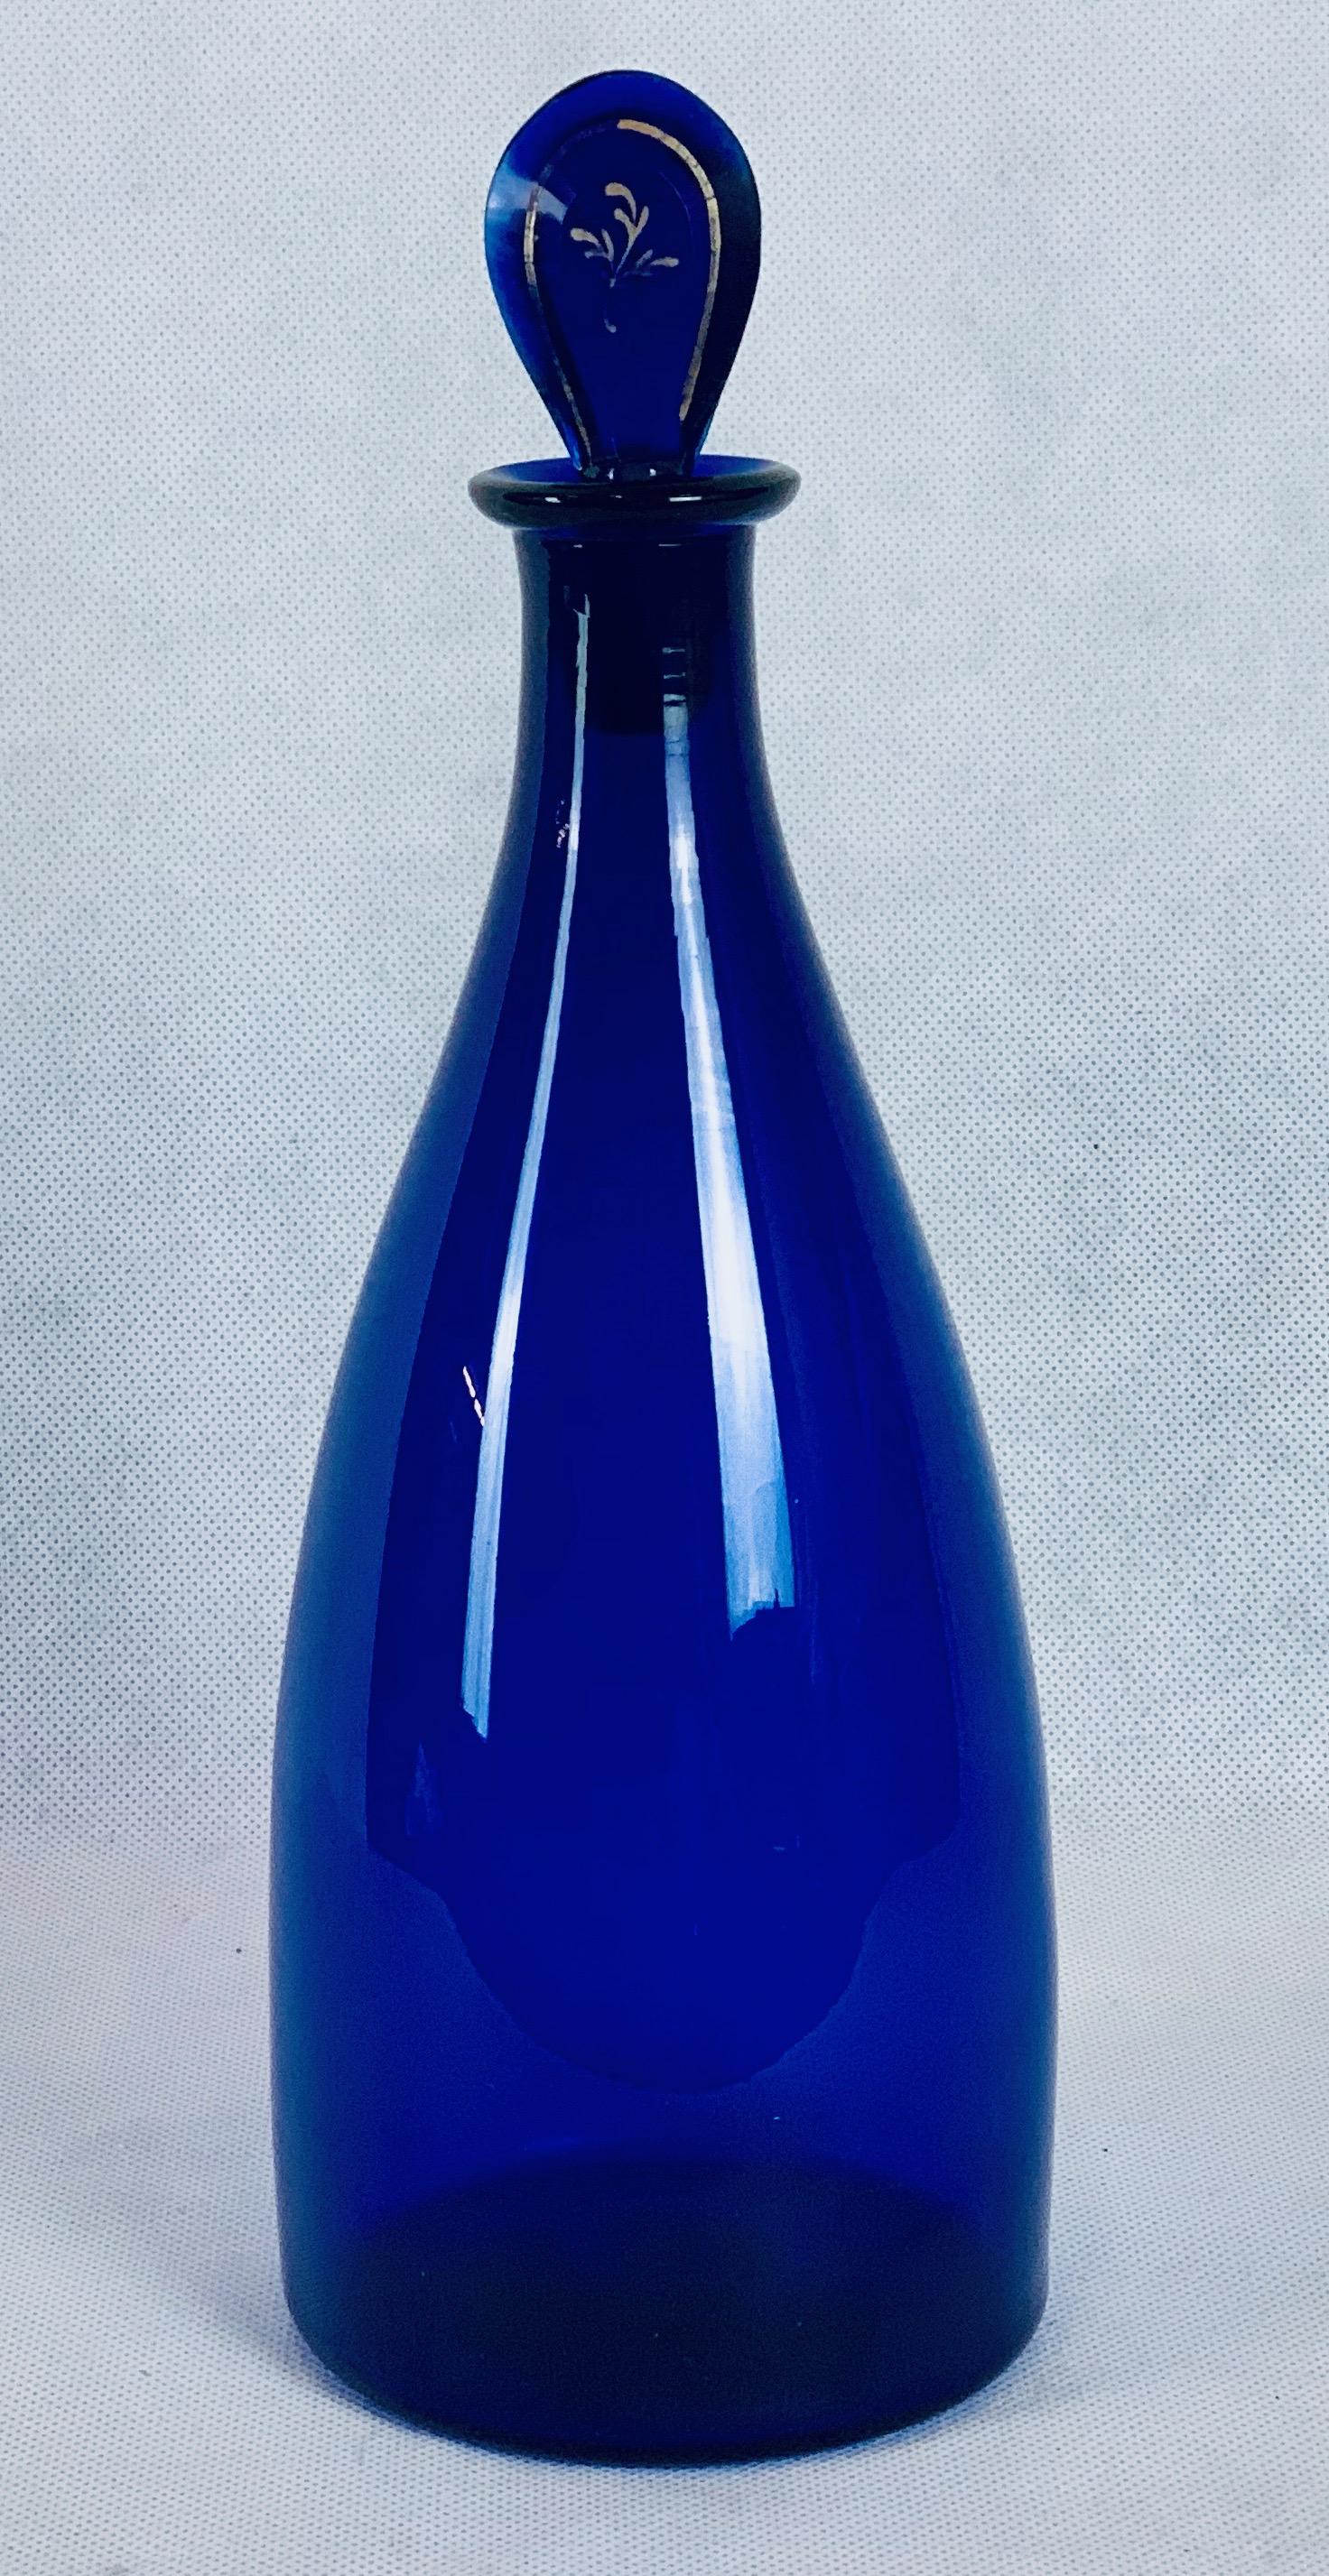 Georgian Bristol/cobalt blue Indian club or plain tapered decanter with lozenge shaped stopper. Hand blown with pontil on the underside. The gilt decoration on the stopper reveals an 